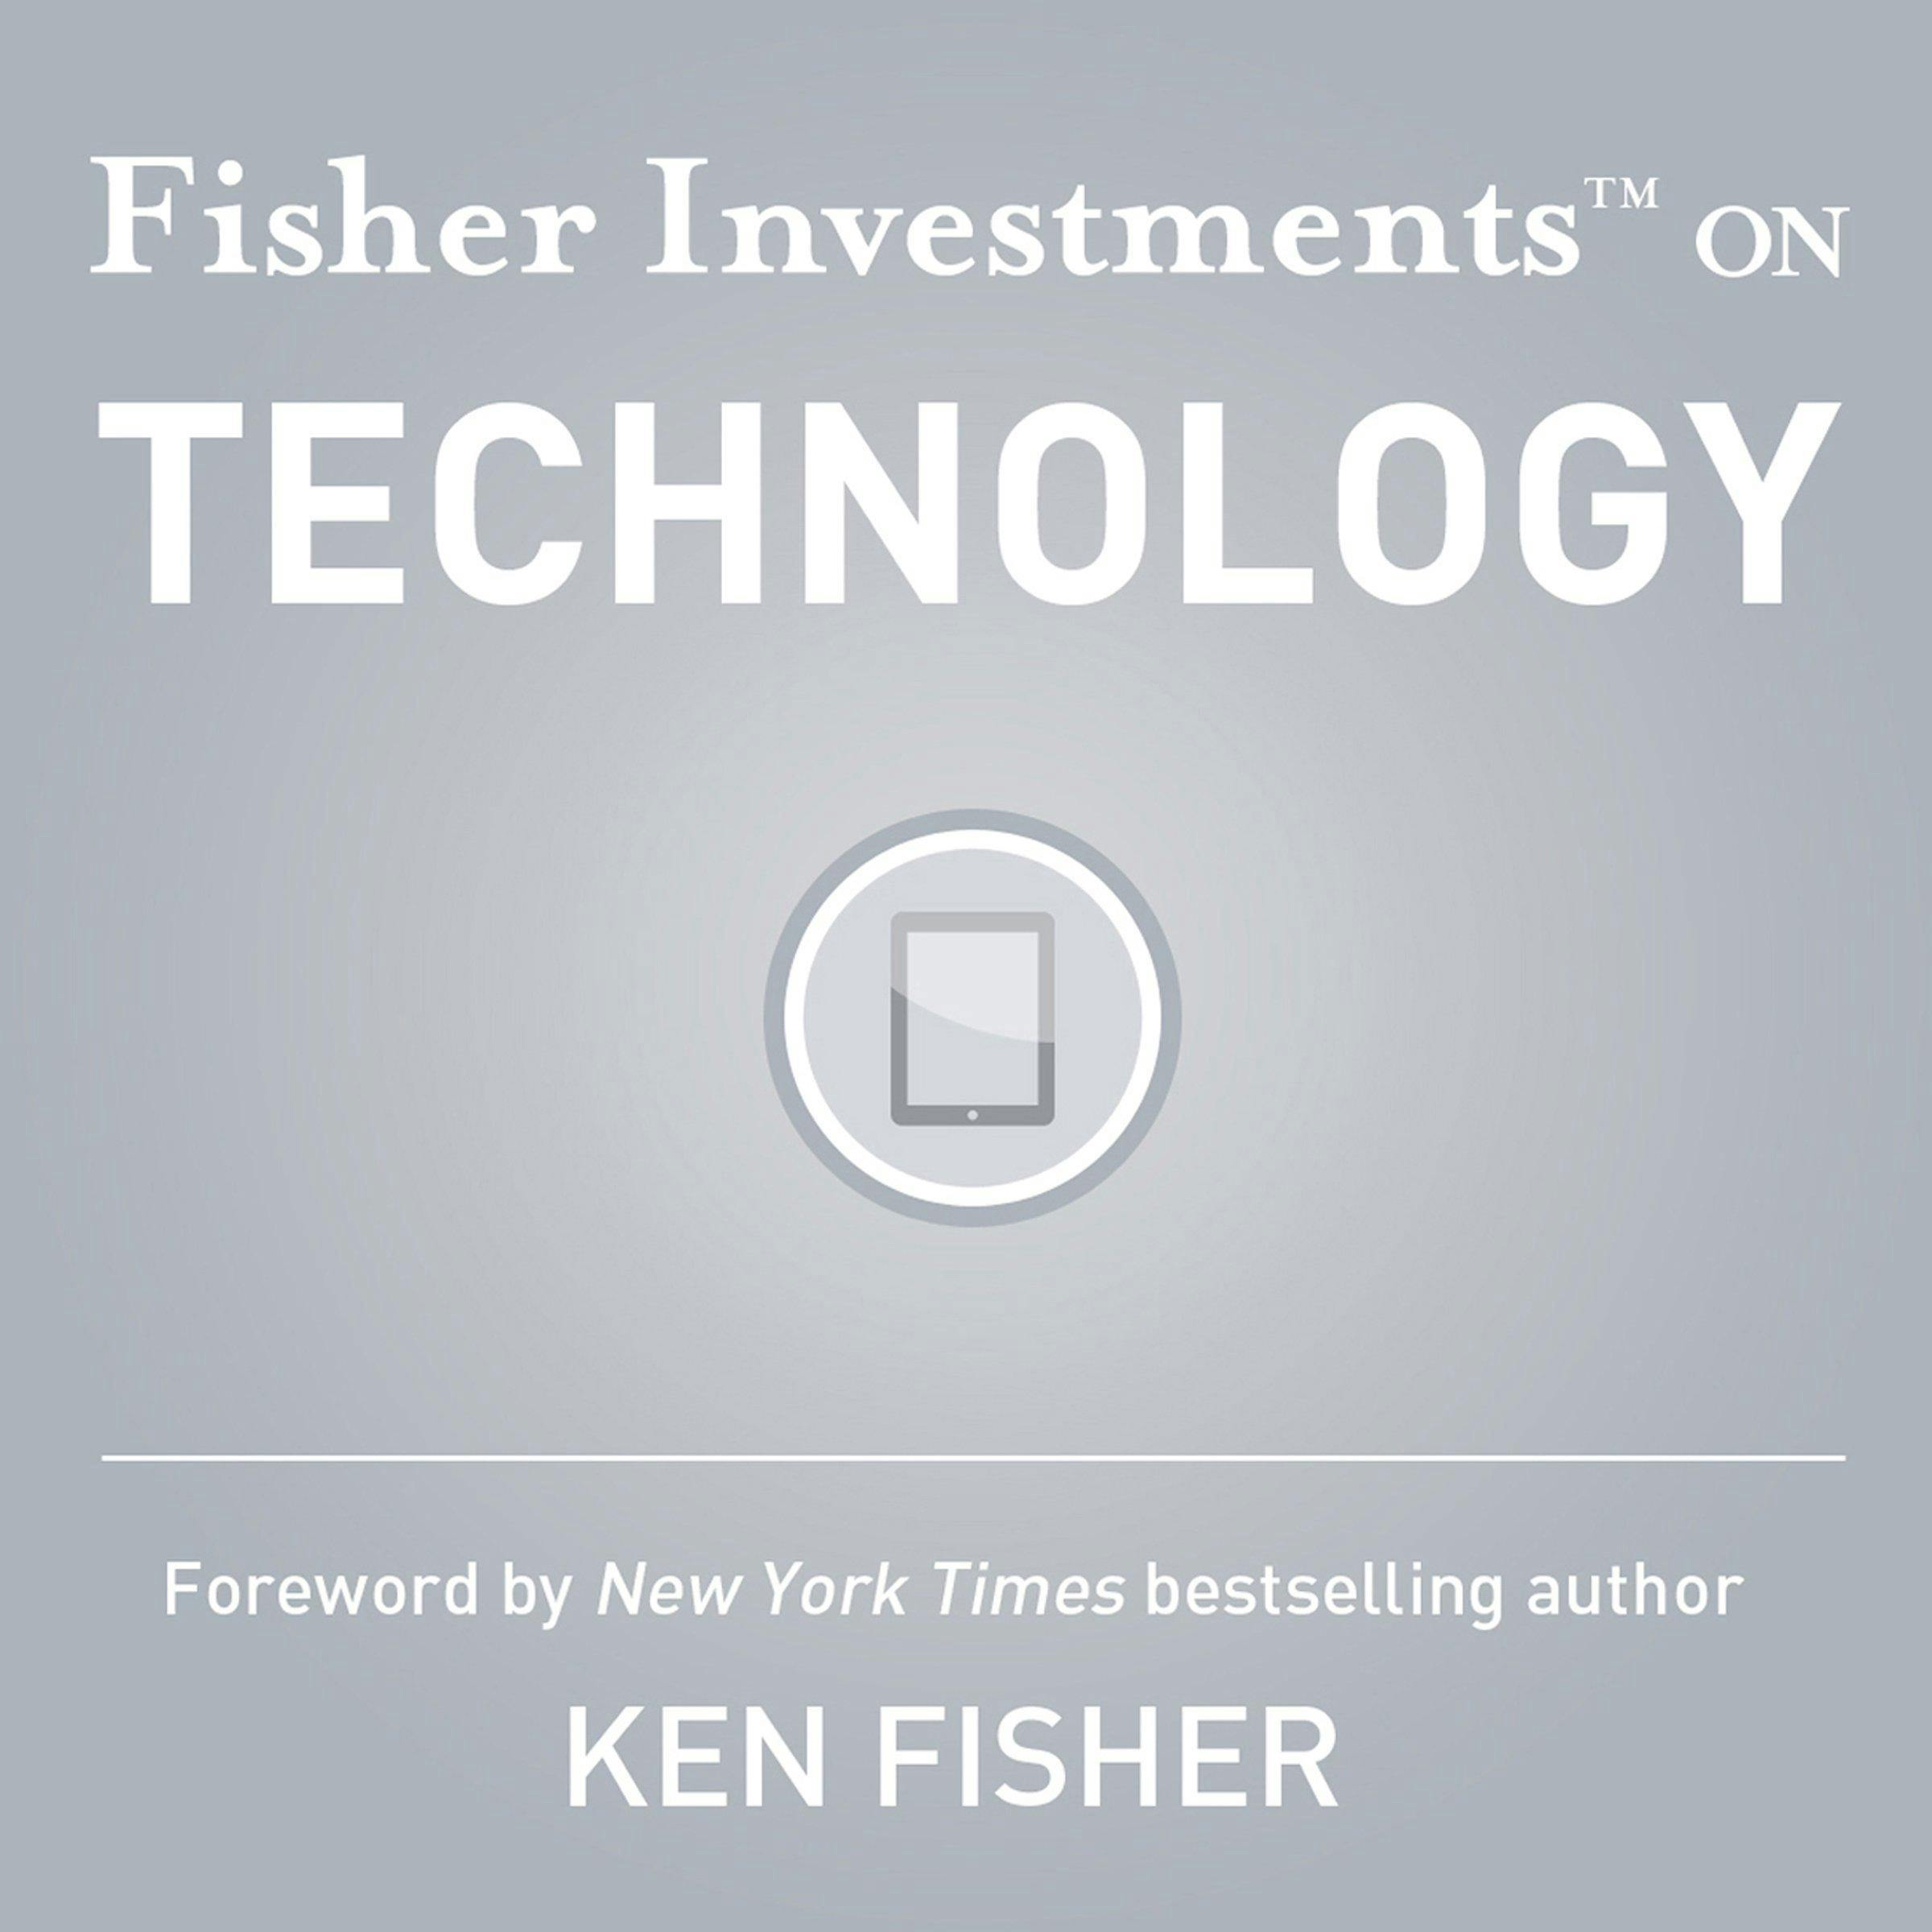 Fisher Investments on Technology - Brendan Fisher Investments, Teufel, Andrew Erne